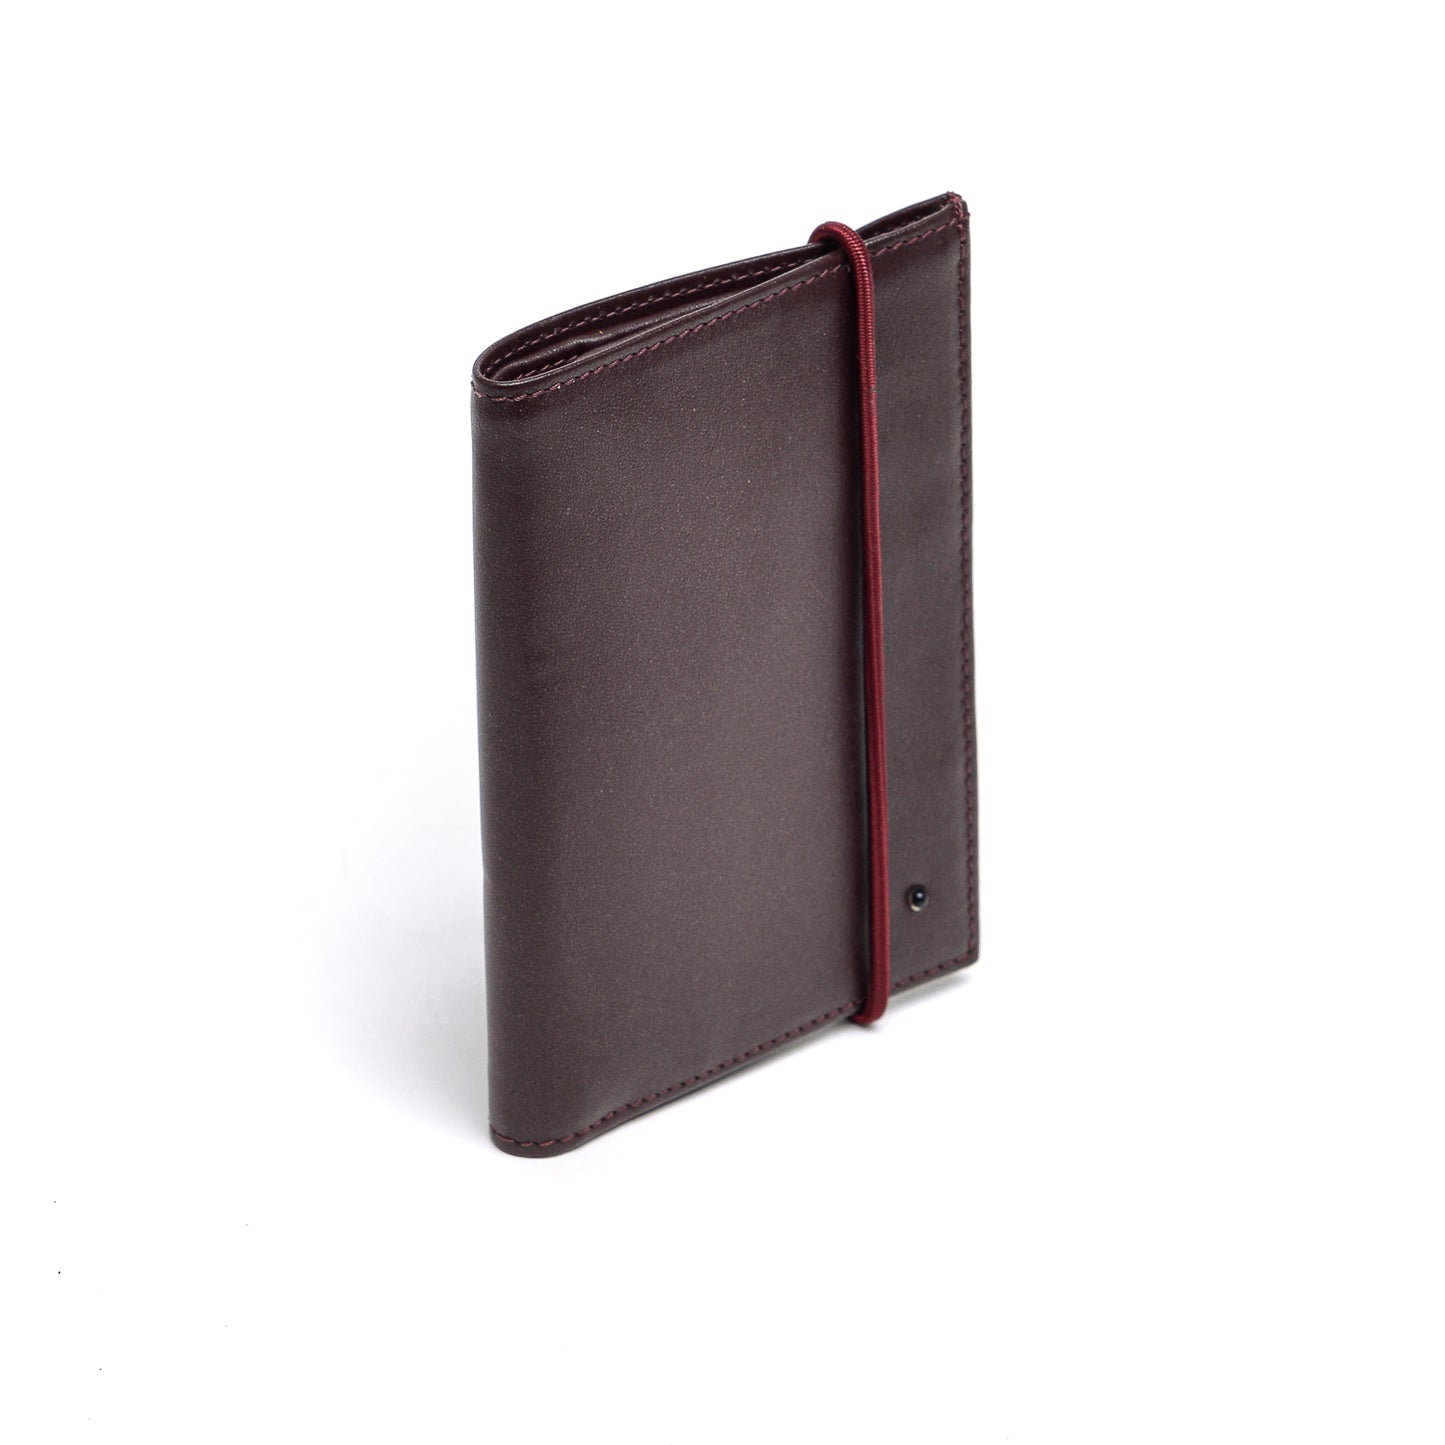 Classic Folding Wallet 1 side Leather Bordeuax